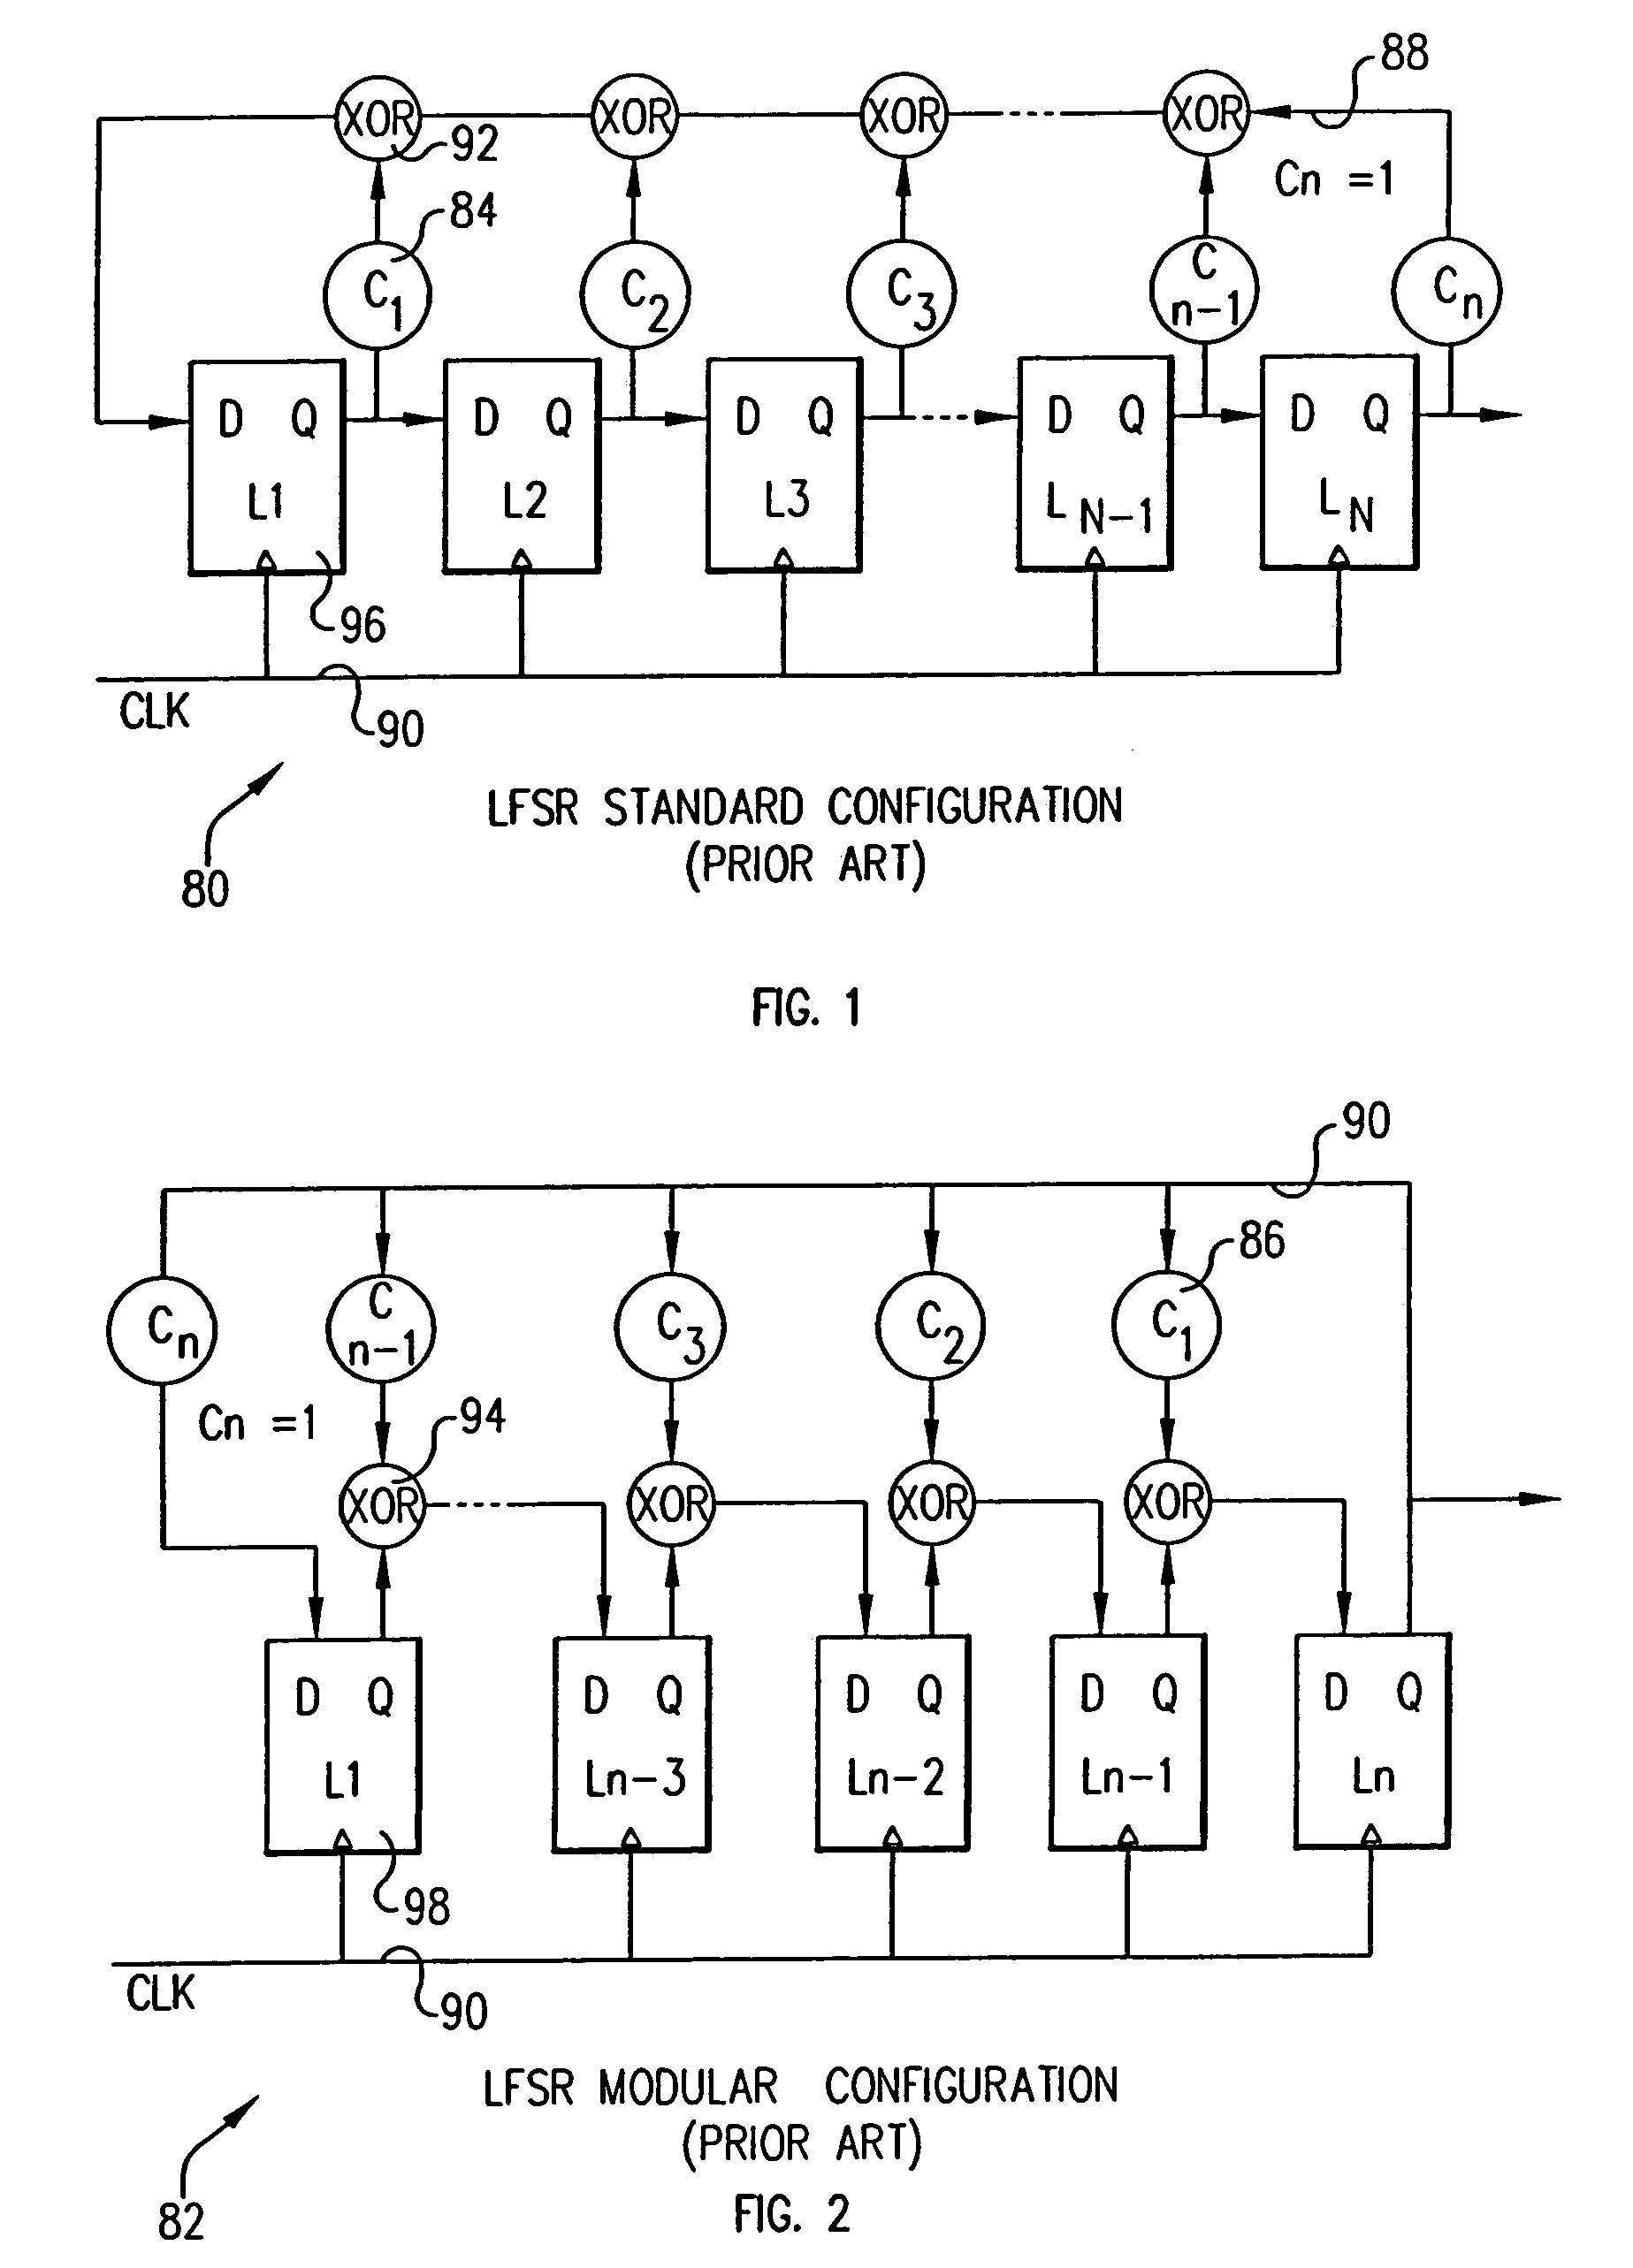 System and method for determining the Nth state of linear feedback shift registers